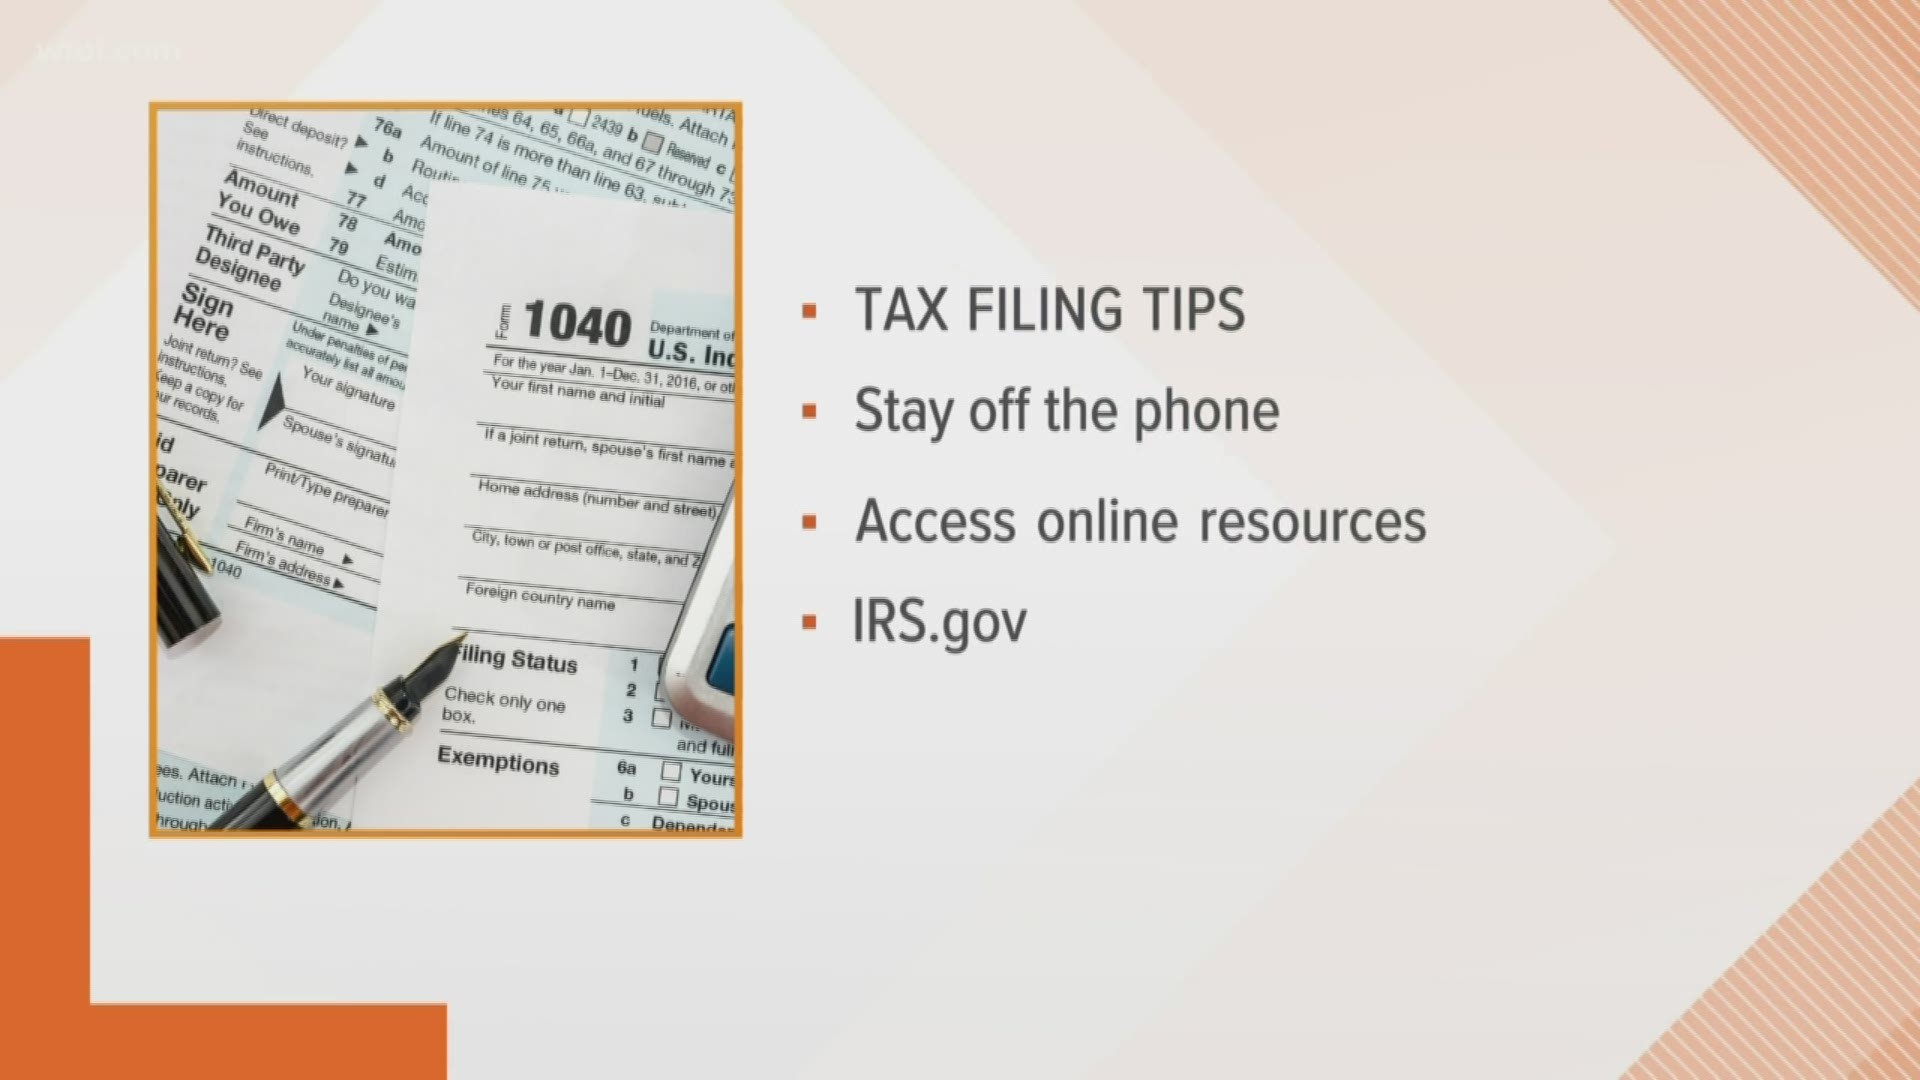 CPA Charlie Heid with Gilmore, Jasion and Mahler has some tips on how to make tax filing easier!